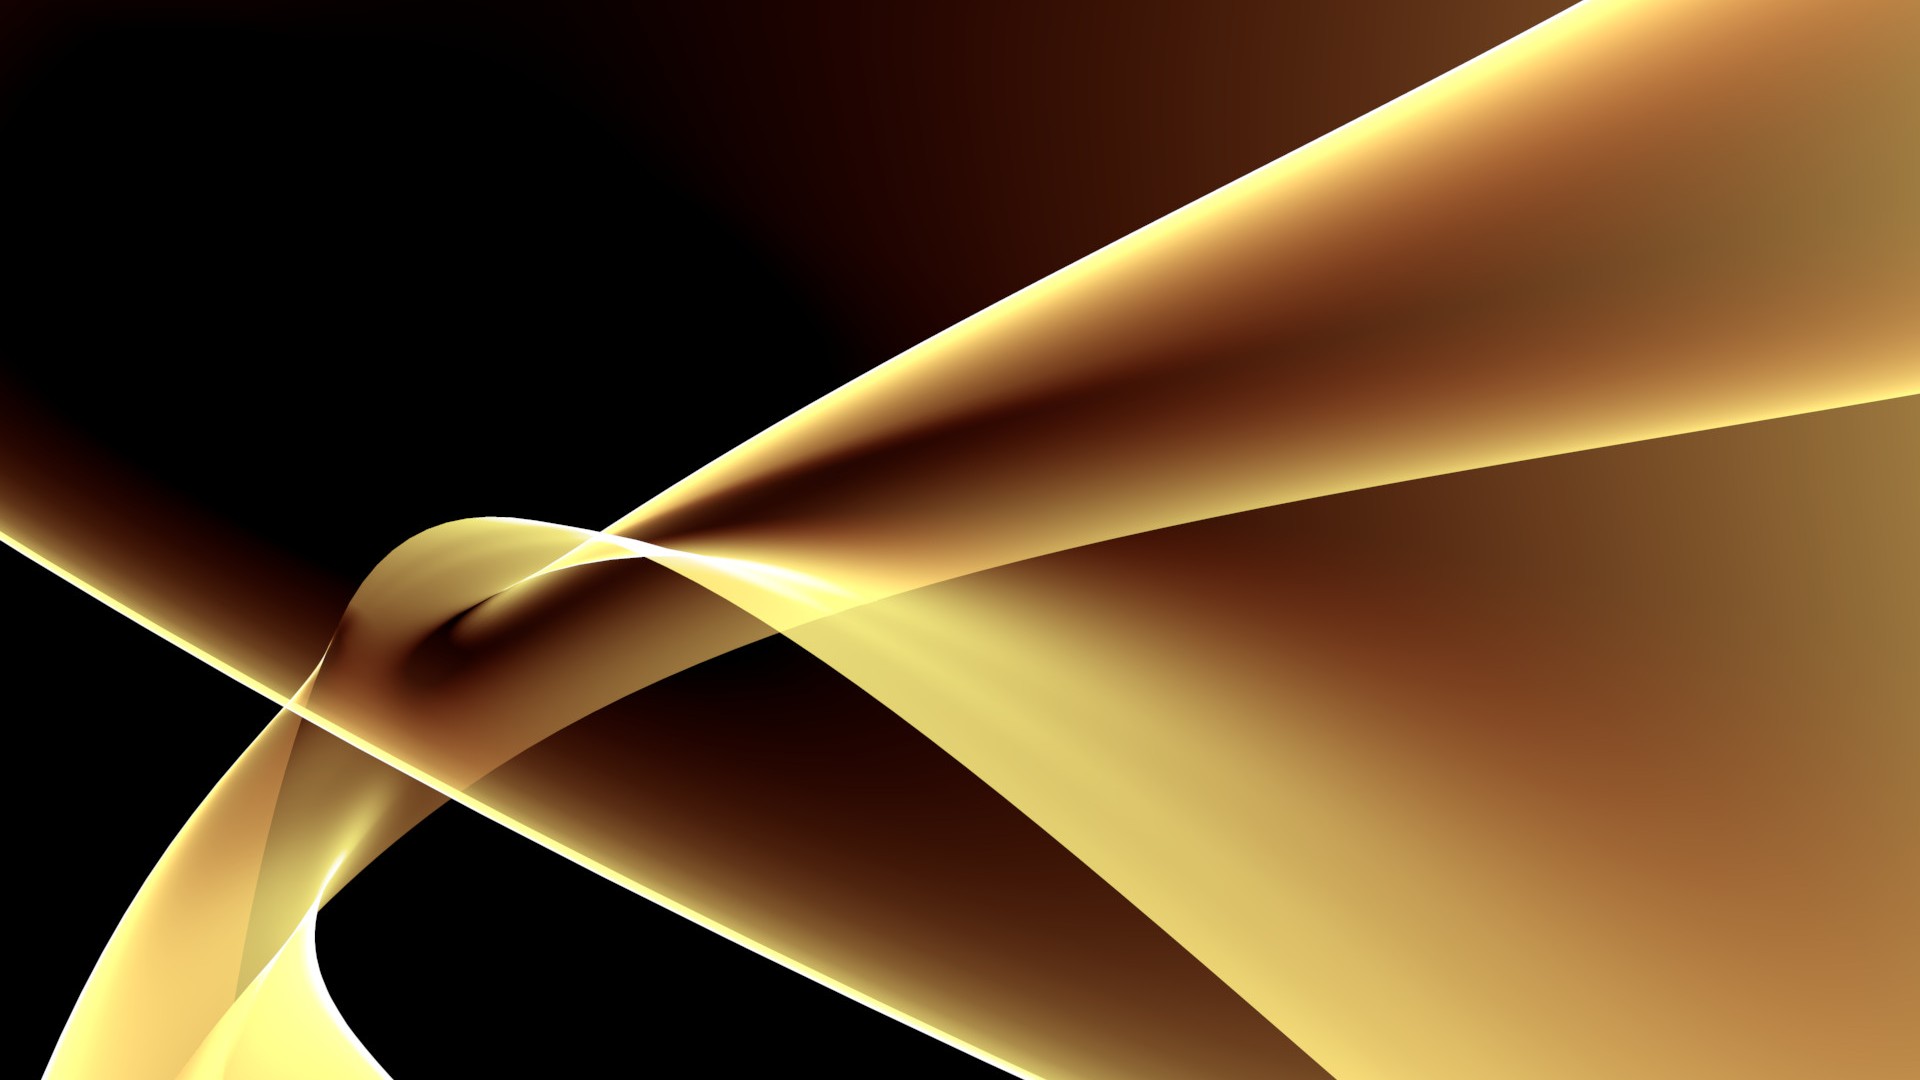 Wallpaper Black and Gold 1920x1080